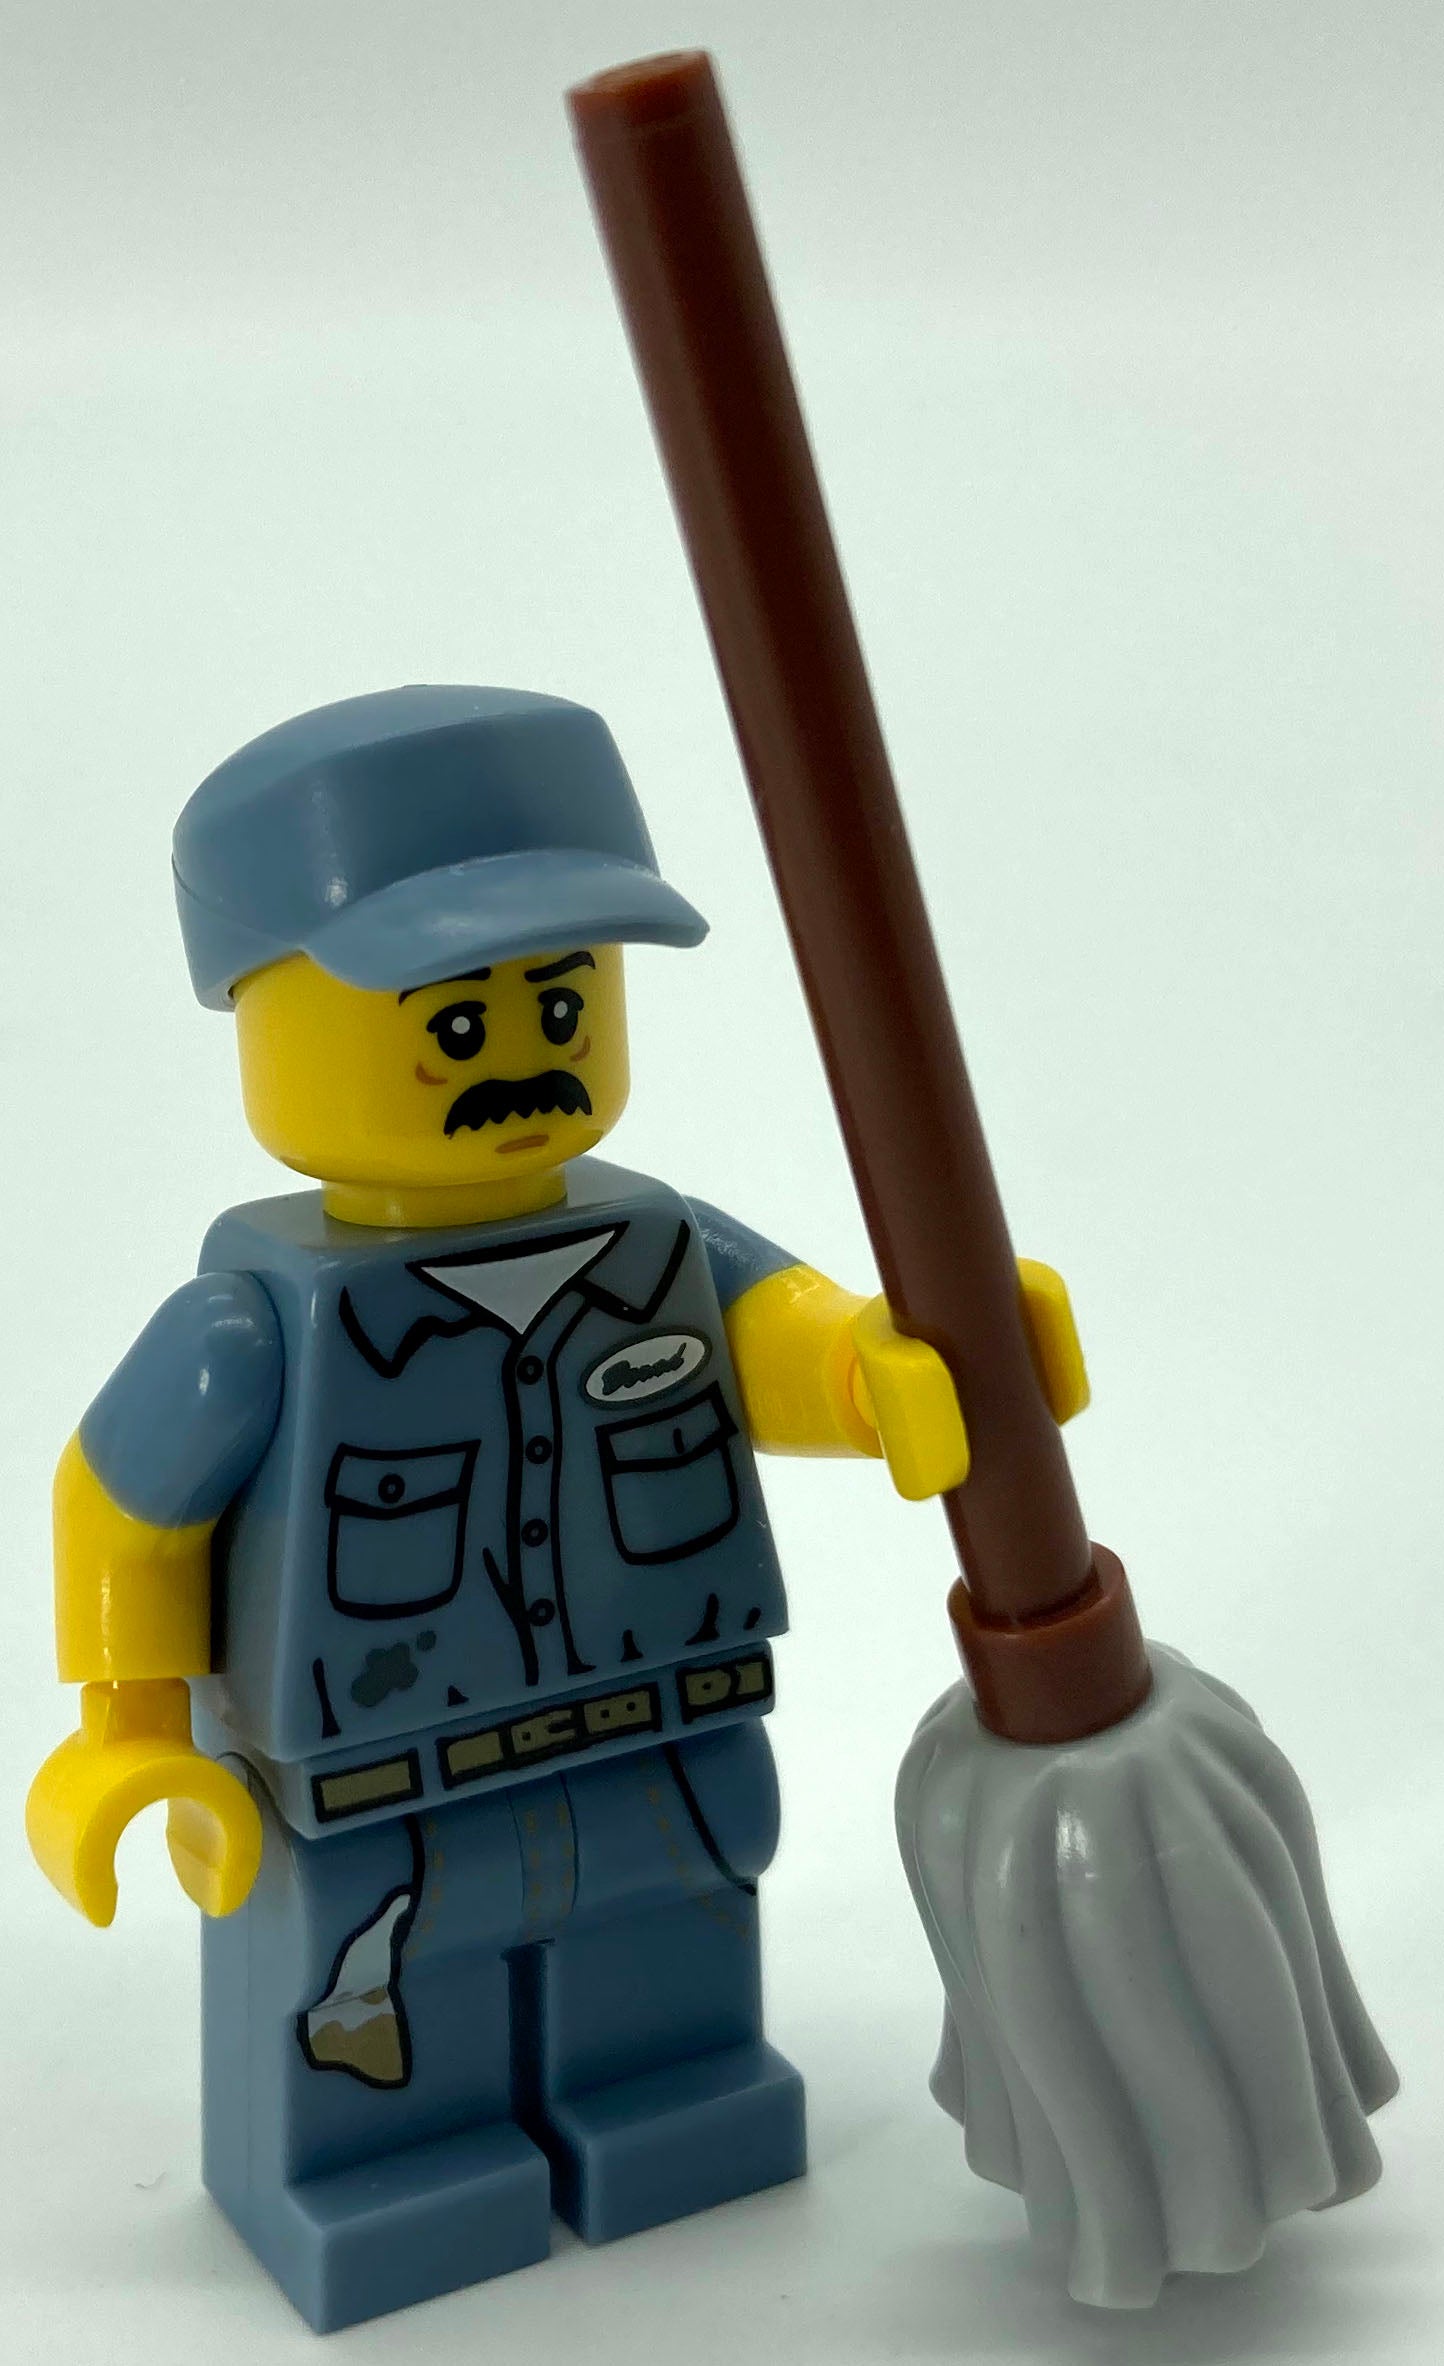 Series 15 - Janitor